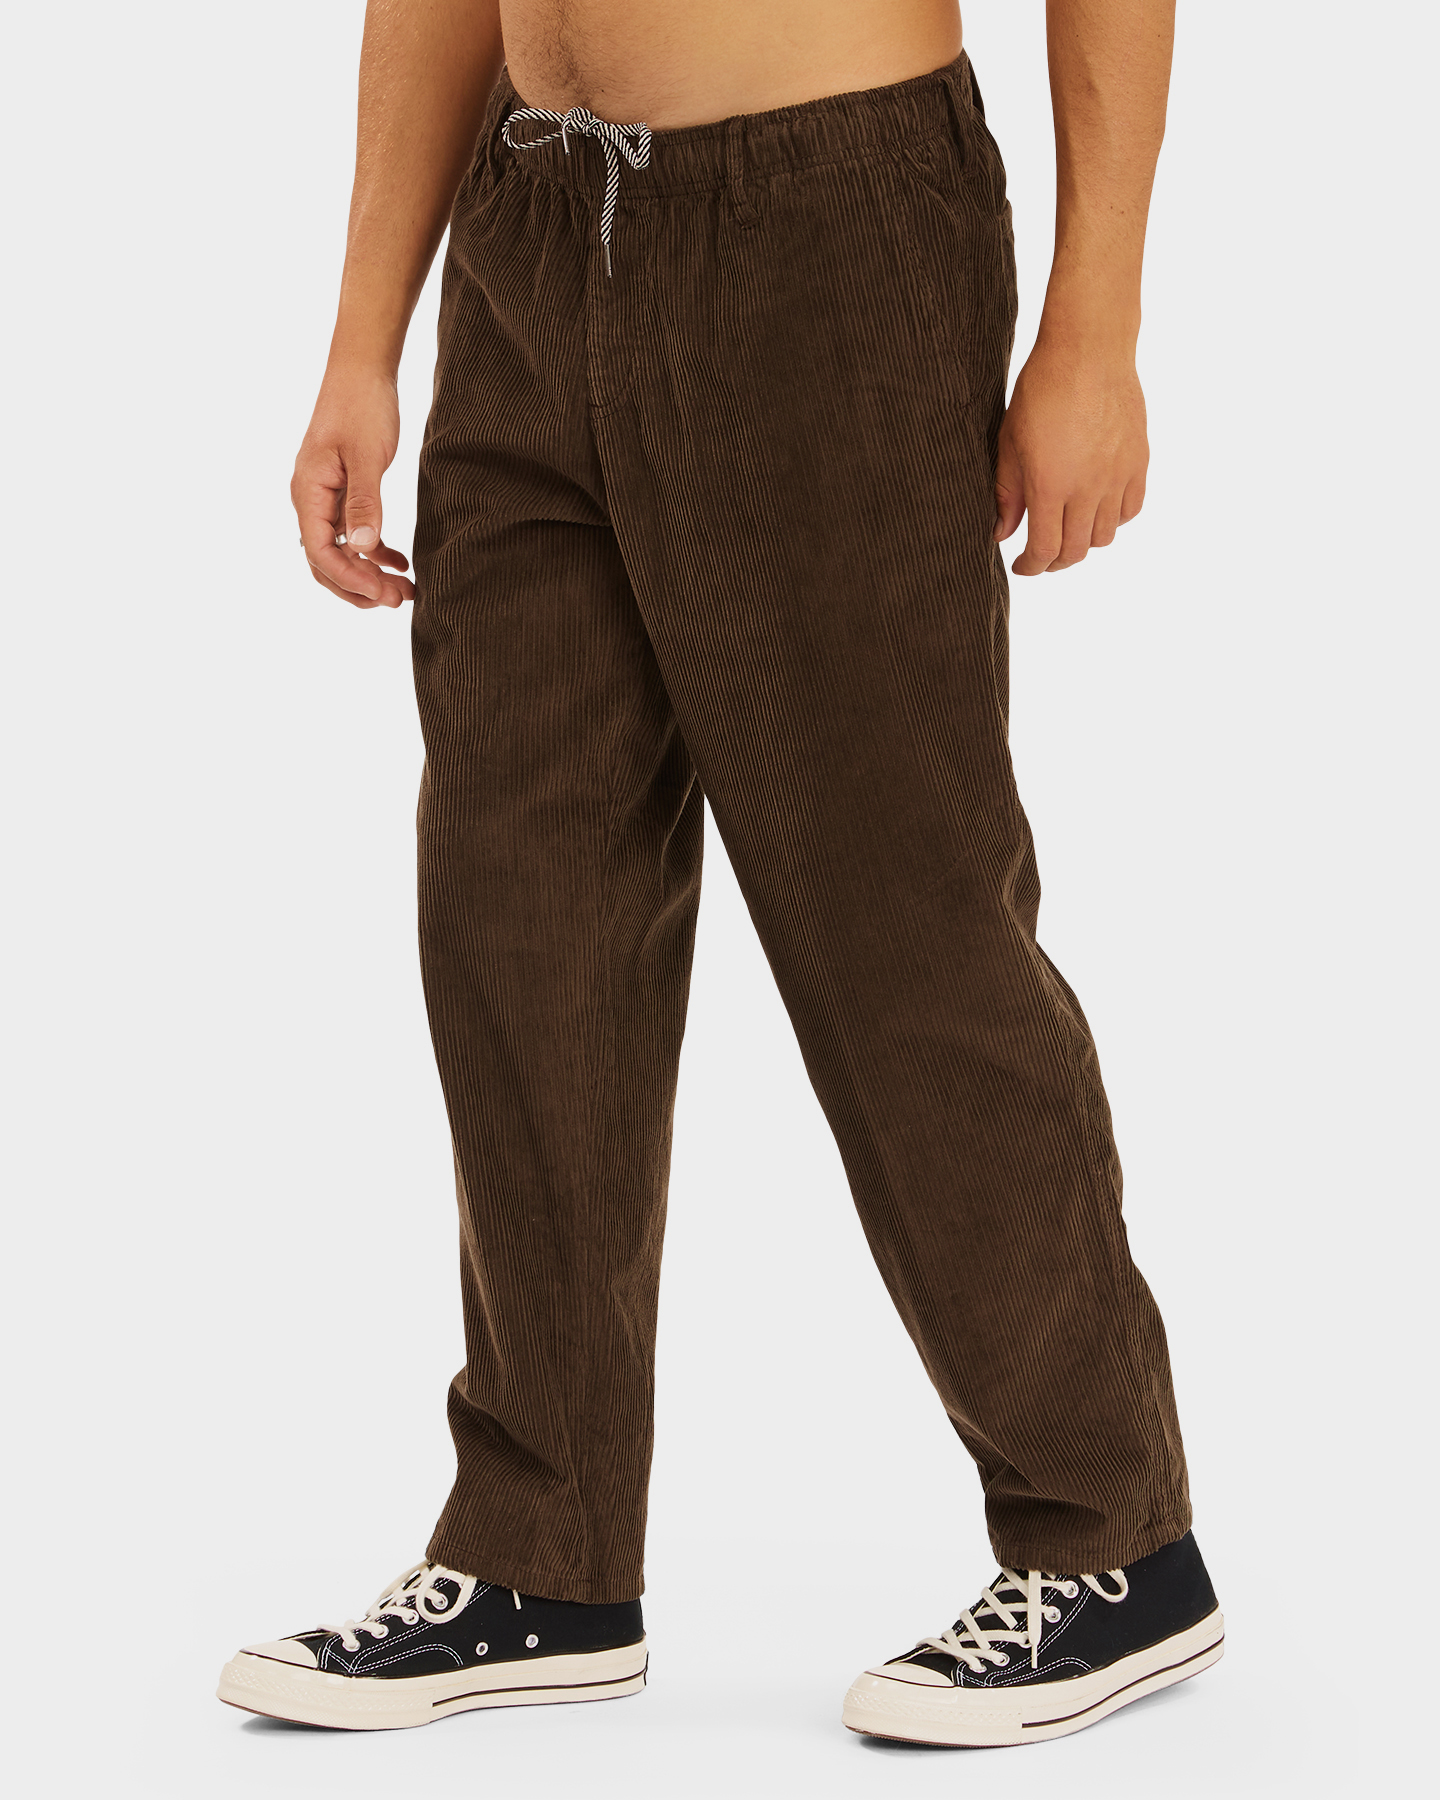 Billabong Wrangler Bowie Layback Pants - Coffee | SurfStitch